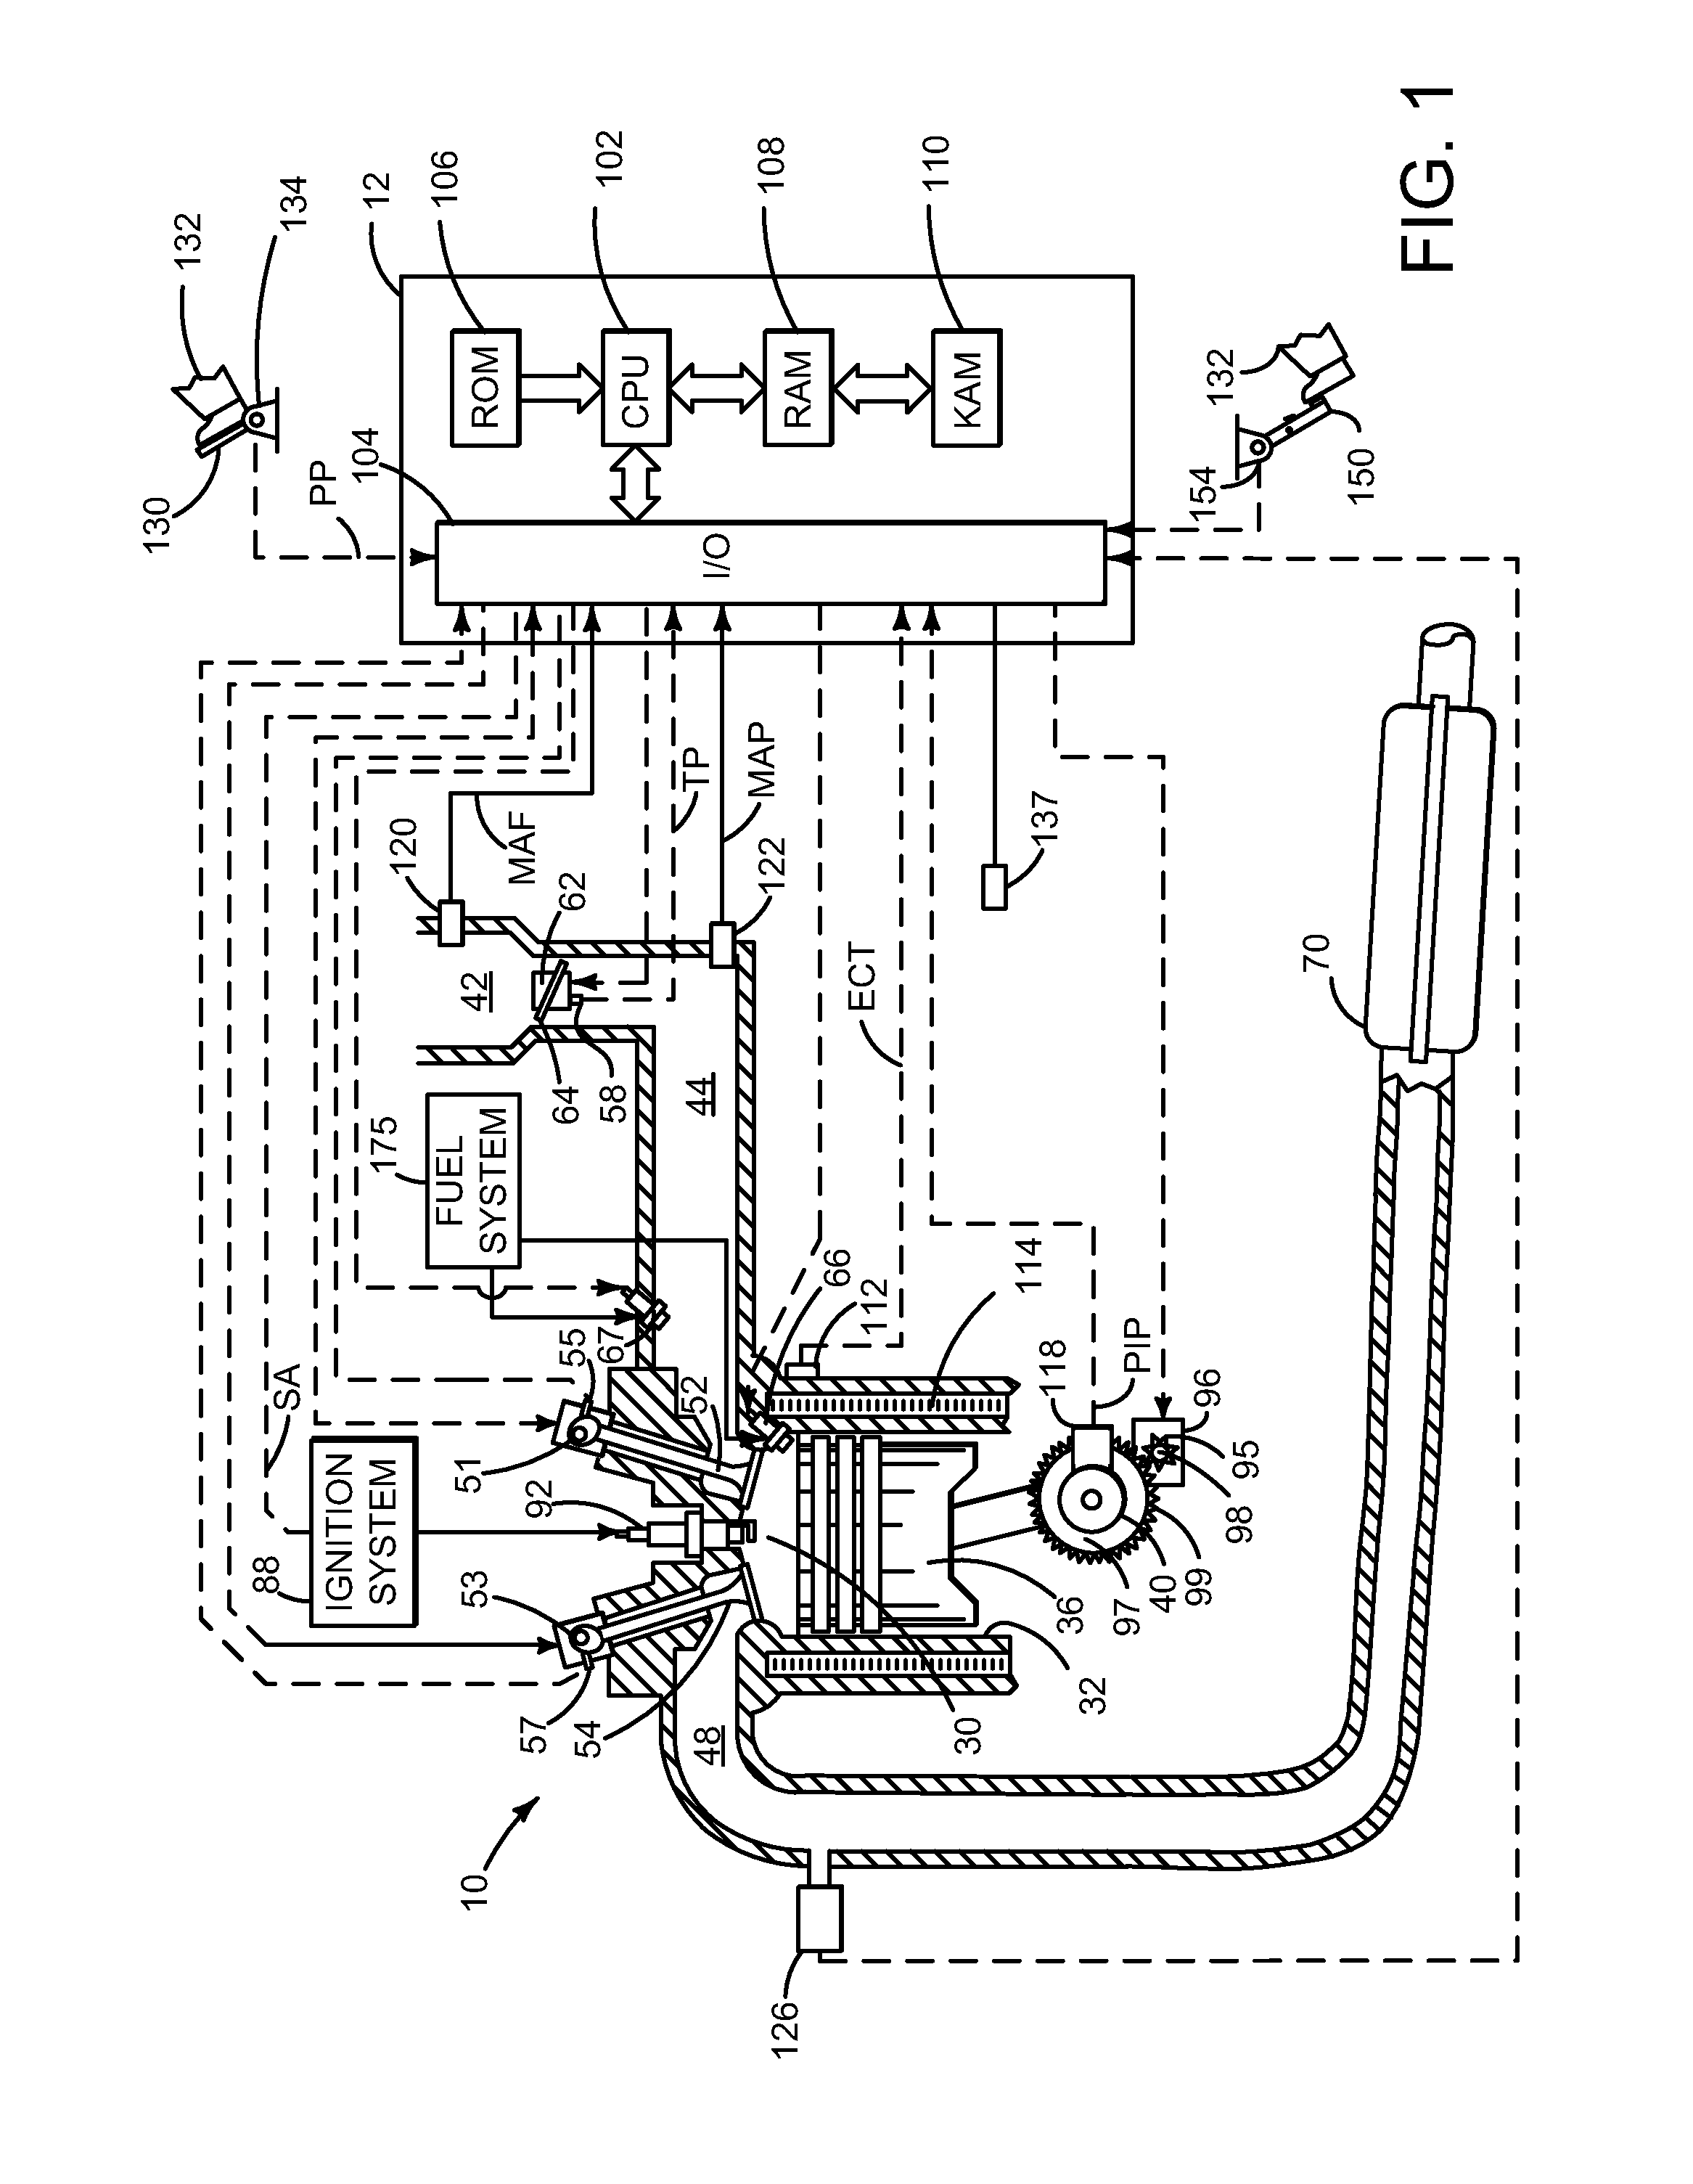 Fuel separation system for reducing parasitic losses